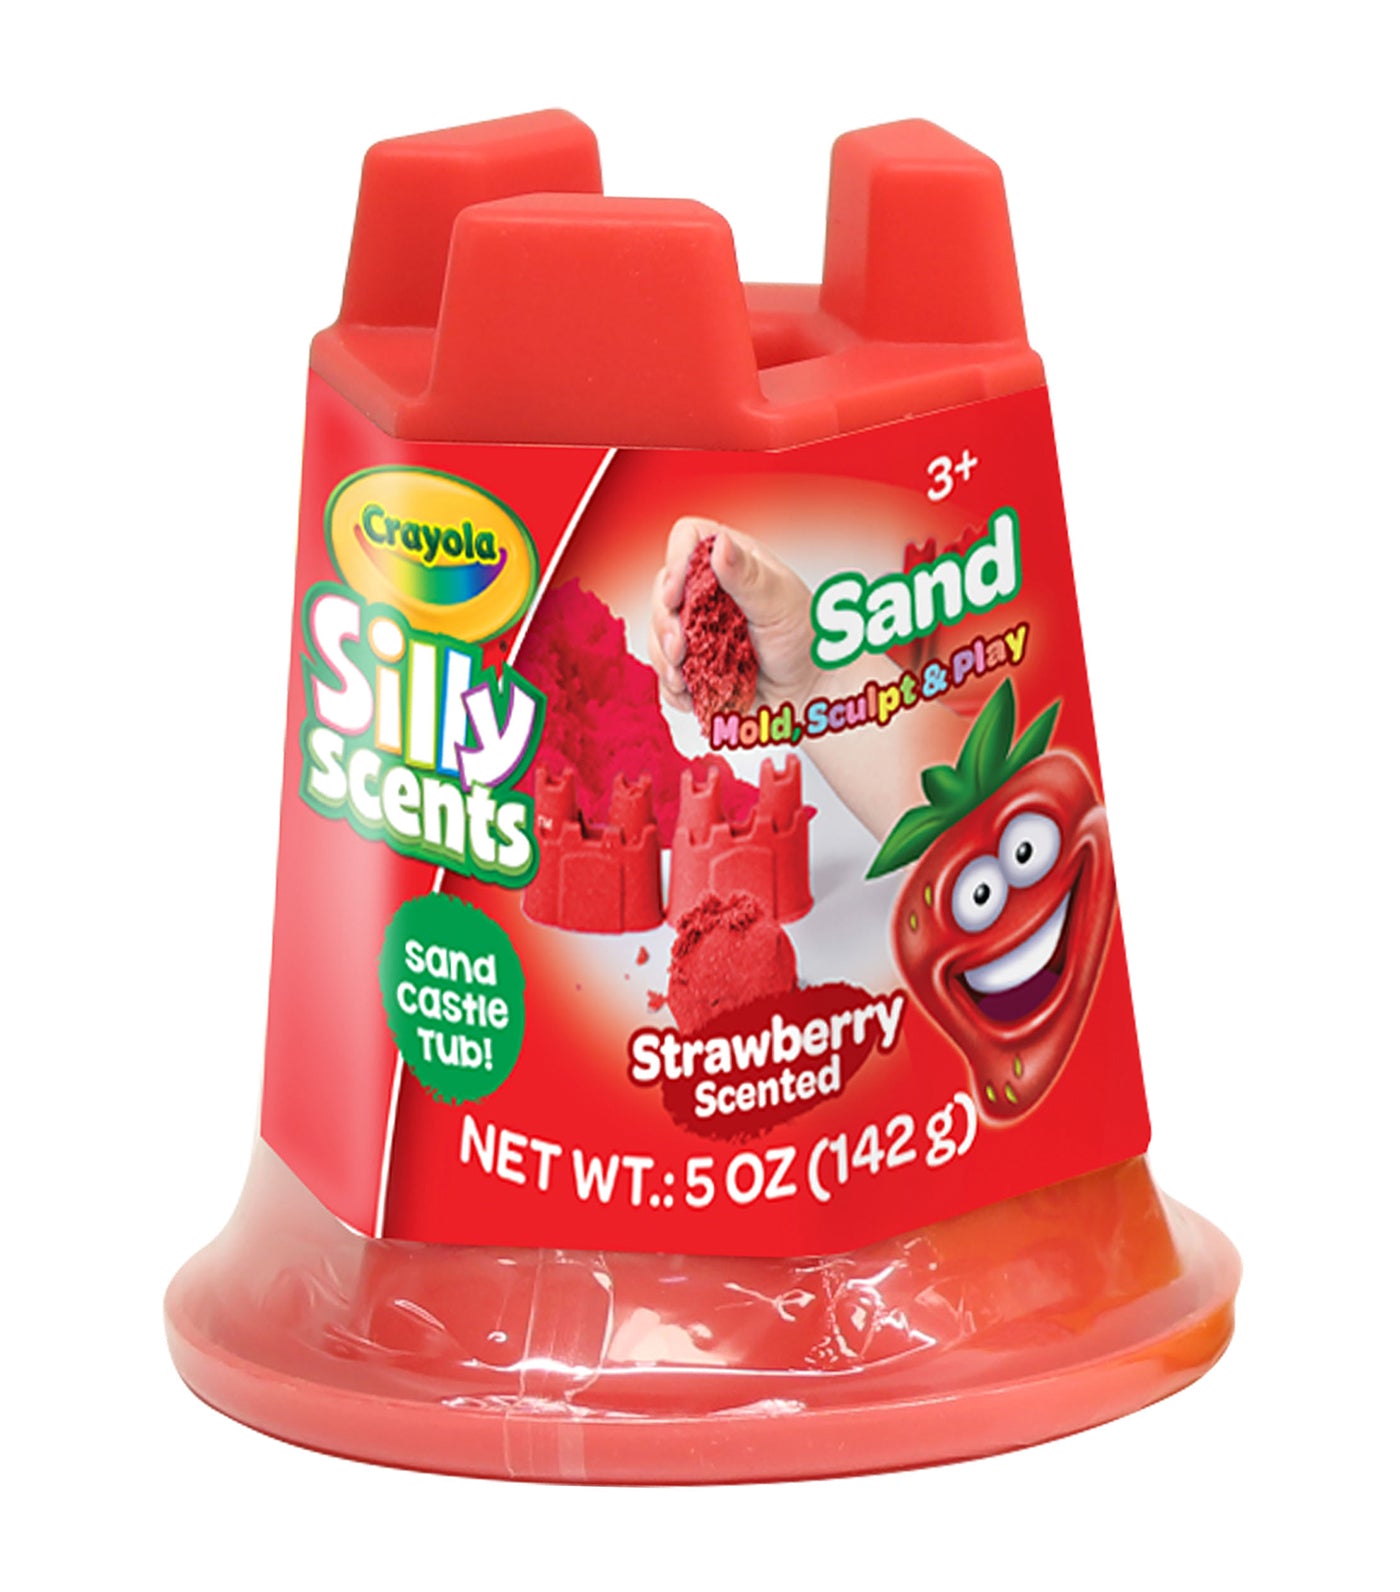 Silly Scents Sand Castle Tub Strawberry